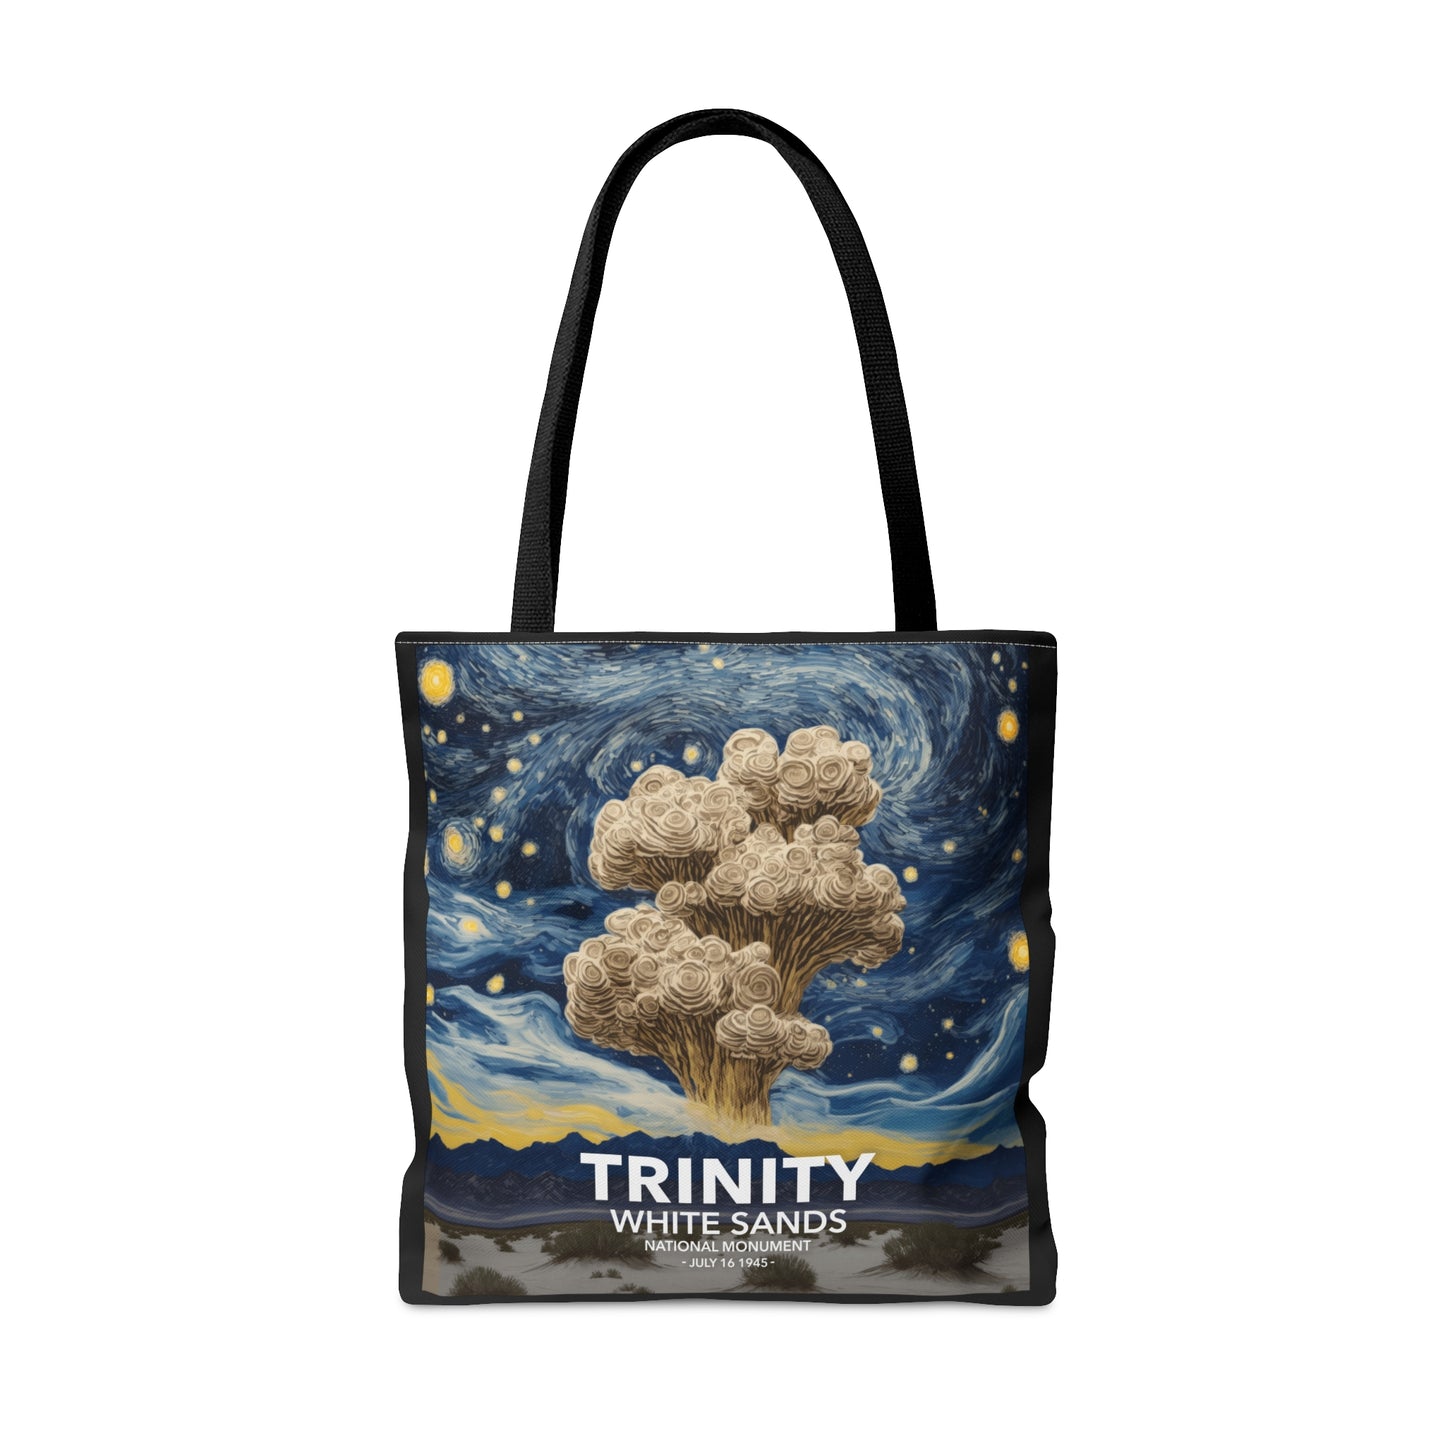 White Sands National Park Tote Bag - The Starry Night Trinity Test